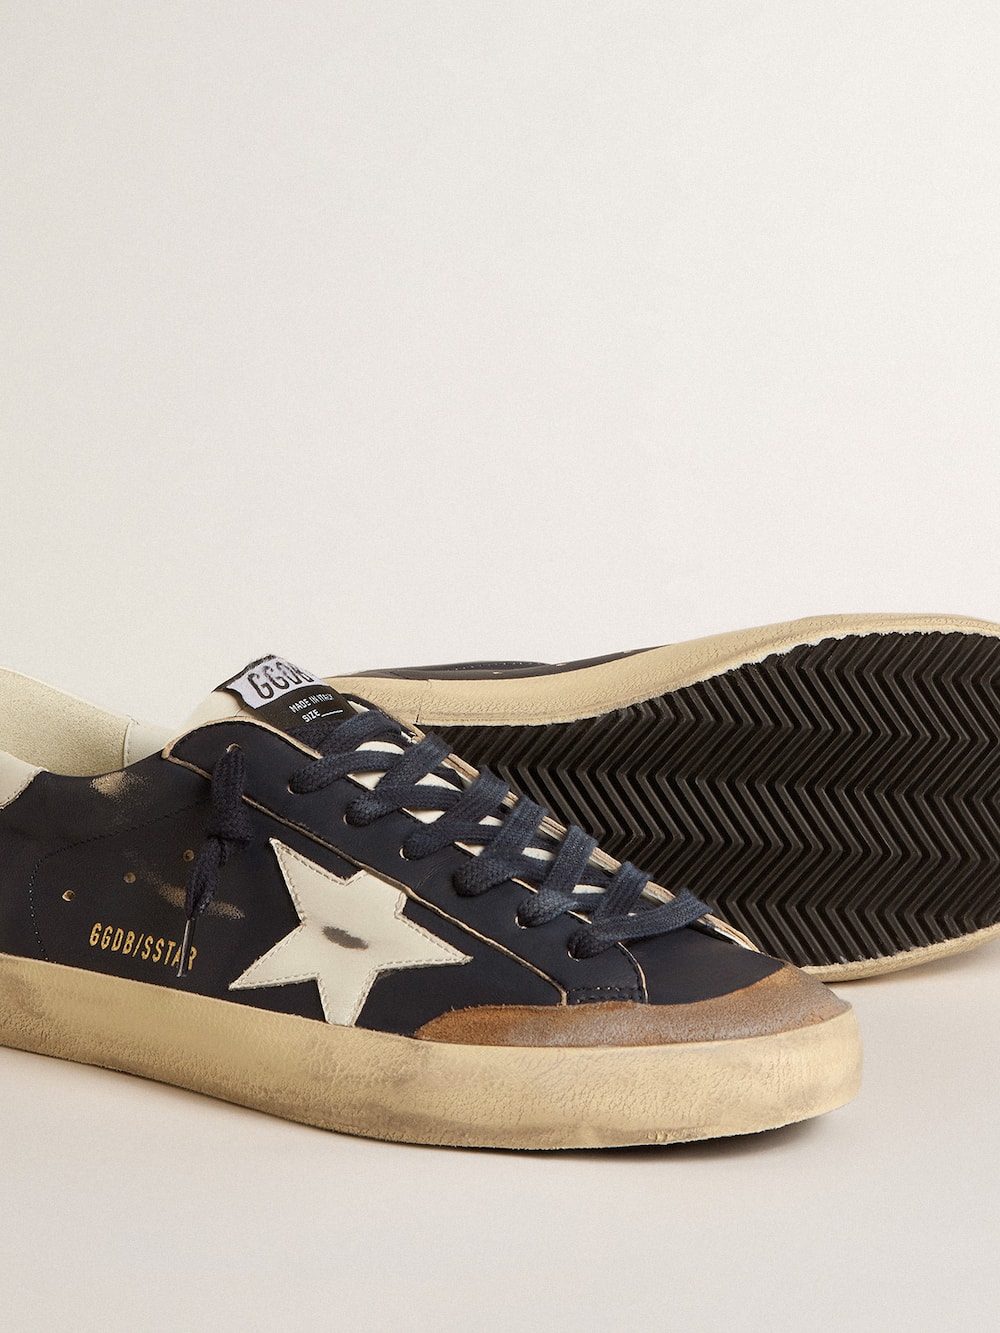 Men's Super-Star in blue nappa leather with white leather star and heel ...